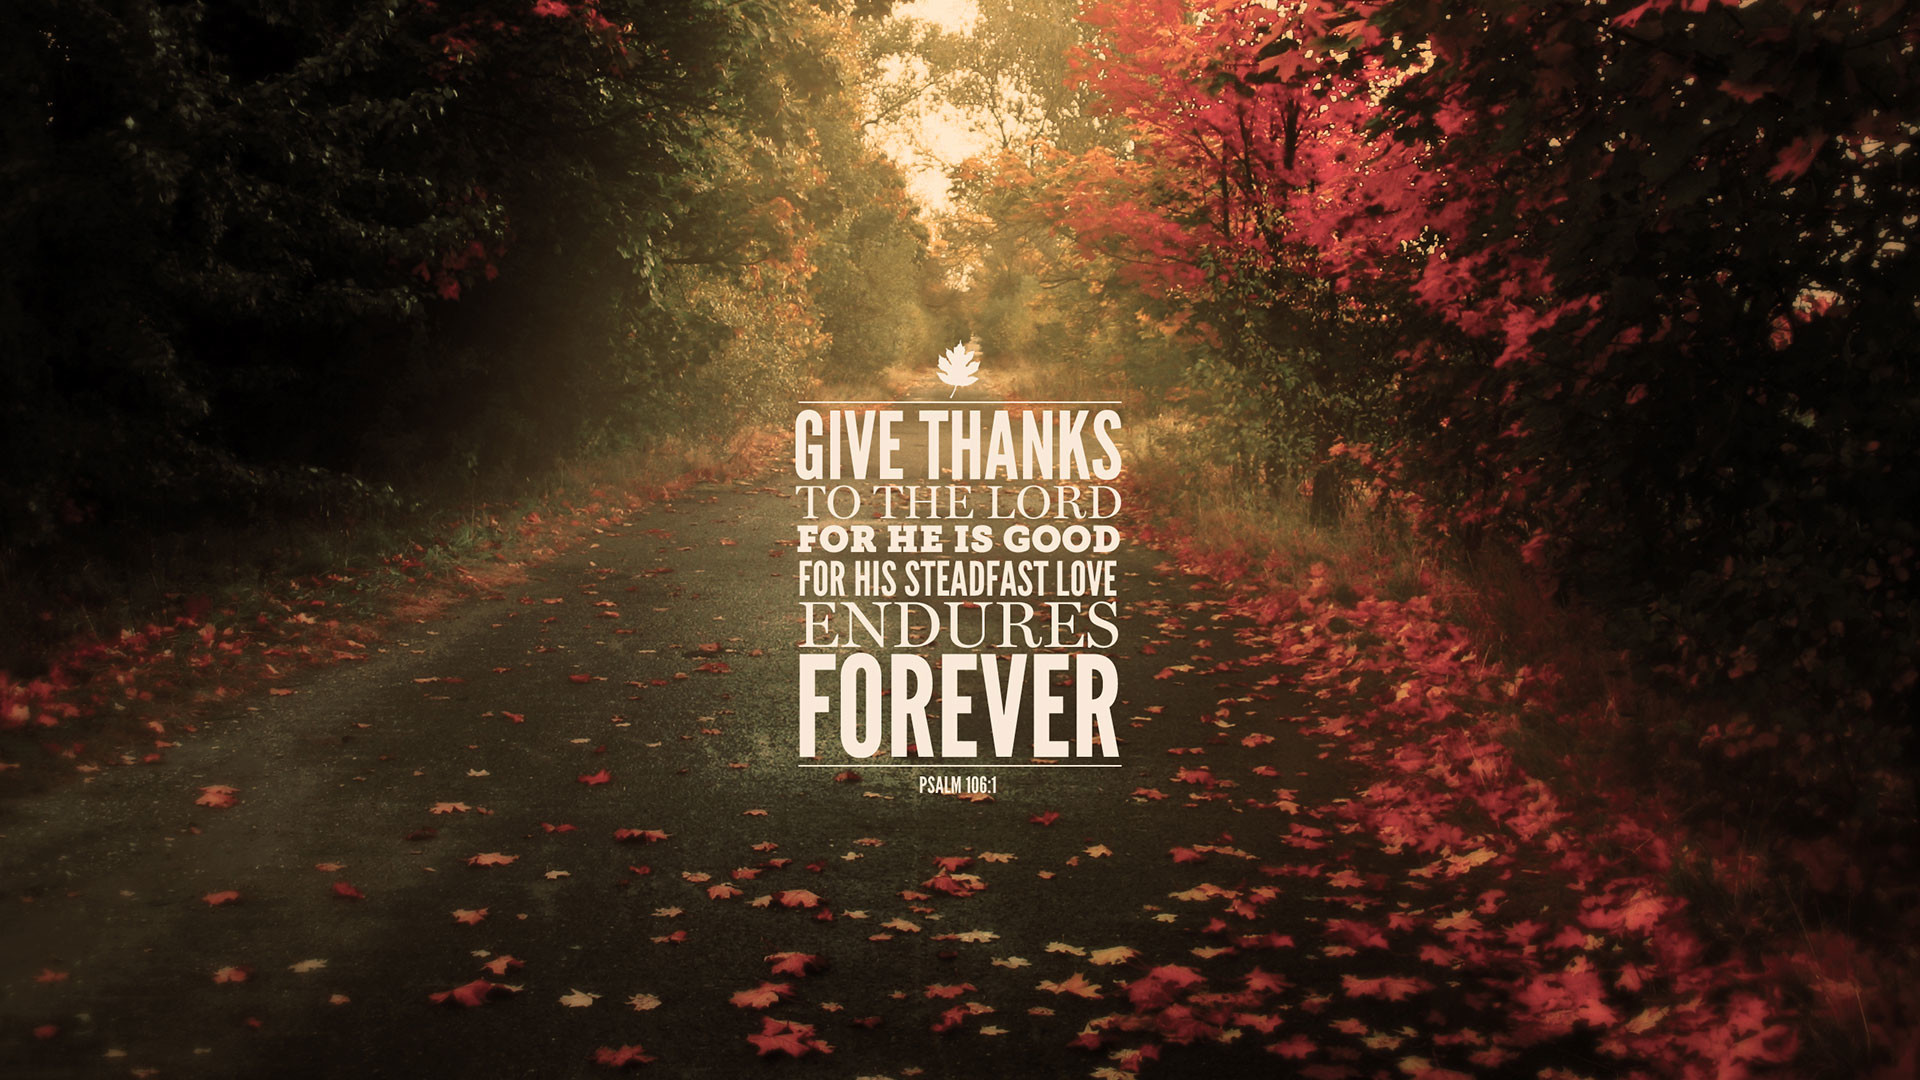 1920x1080 Wednesday Wallpaper: Give Thanks to the Lord, for He is Good #1 .